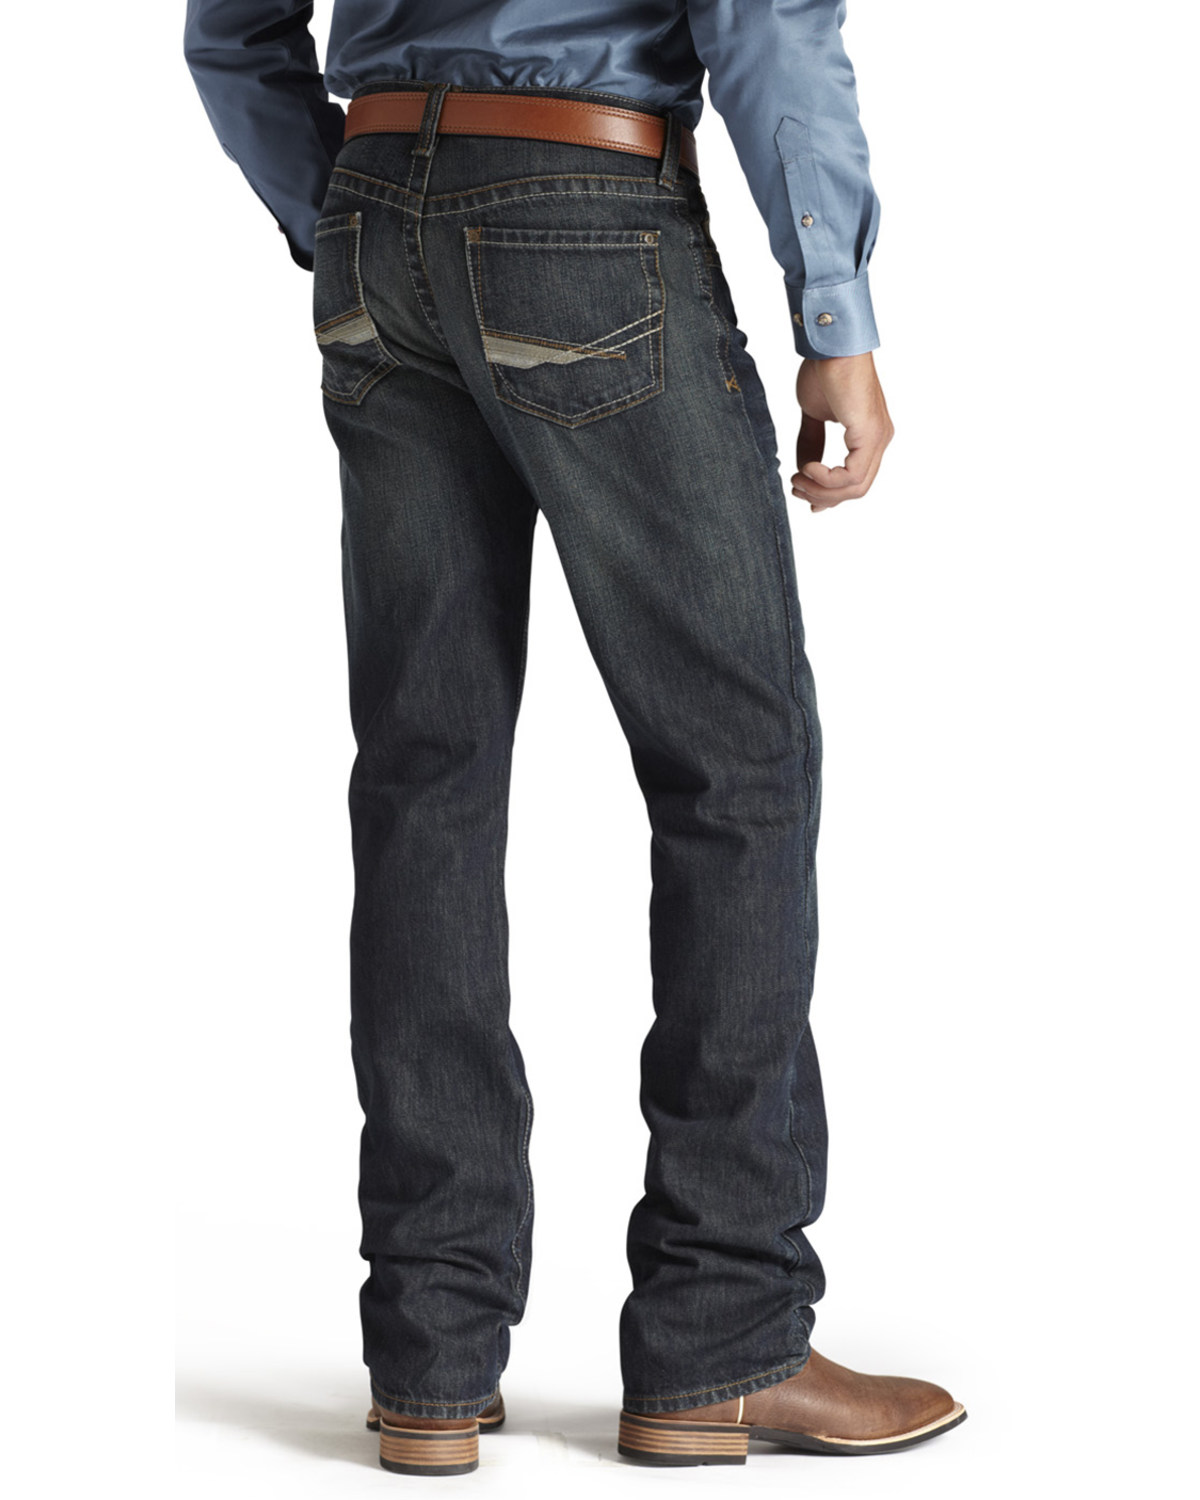 Ariat Men's M2 Dusty Road Relaxed Fit Denim Jeans - Big & Tall